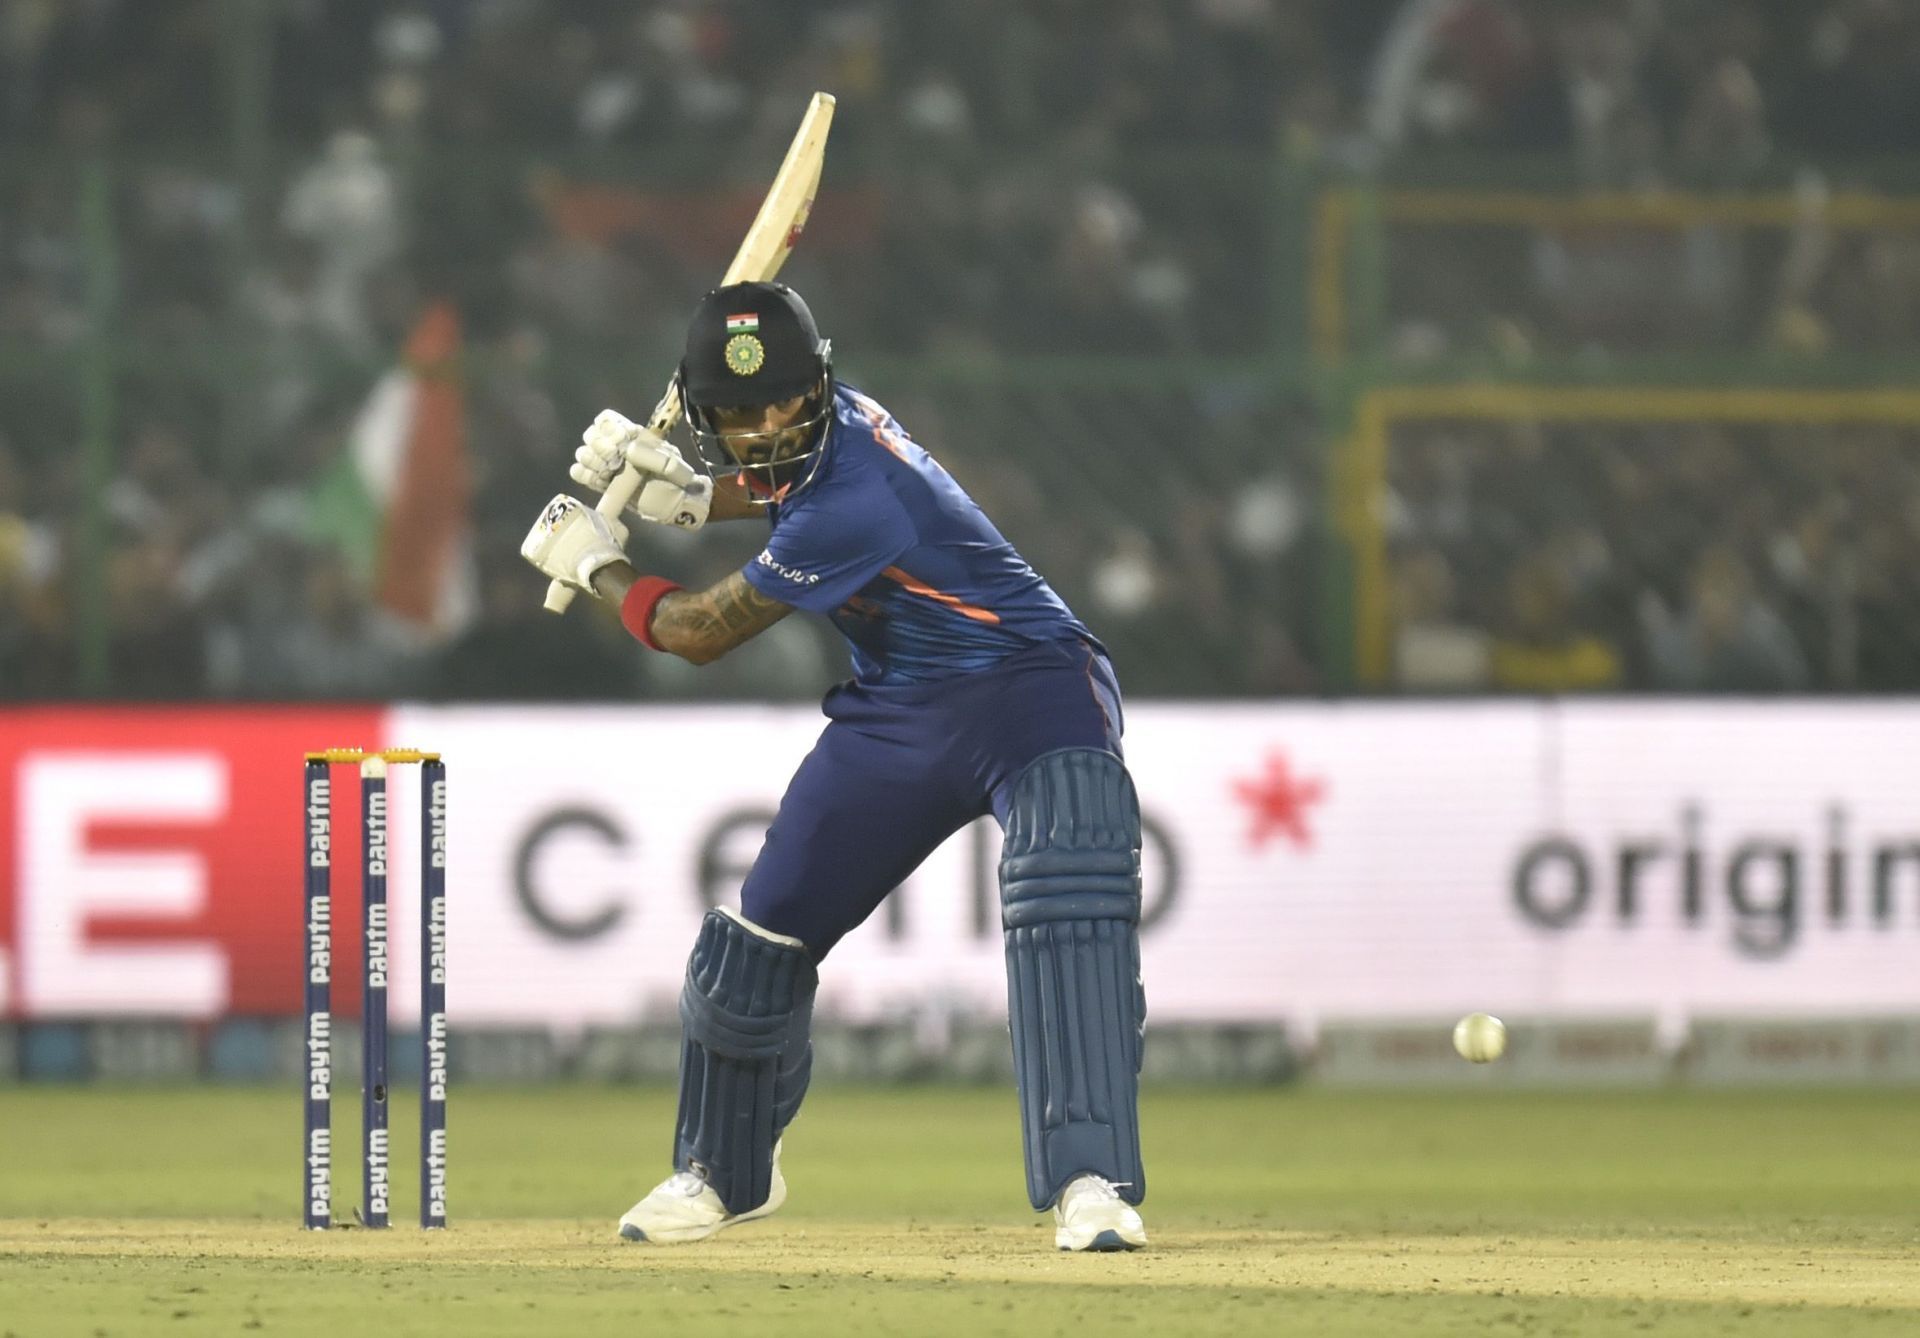 KL Rahul struck two sixes during his innings.